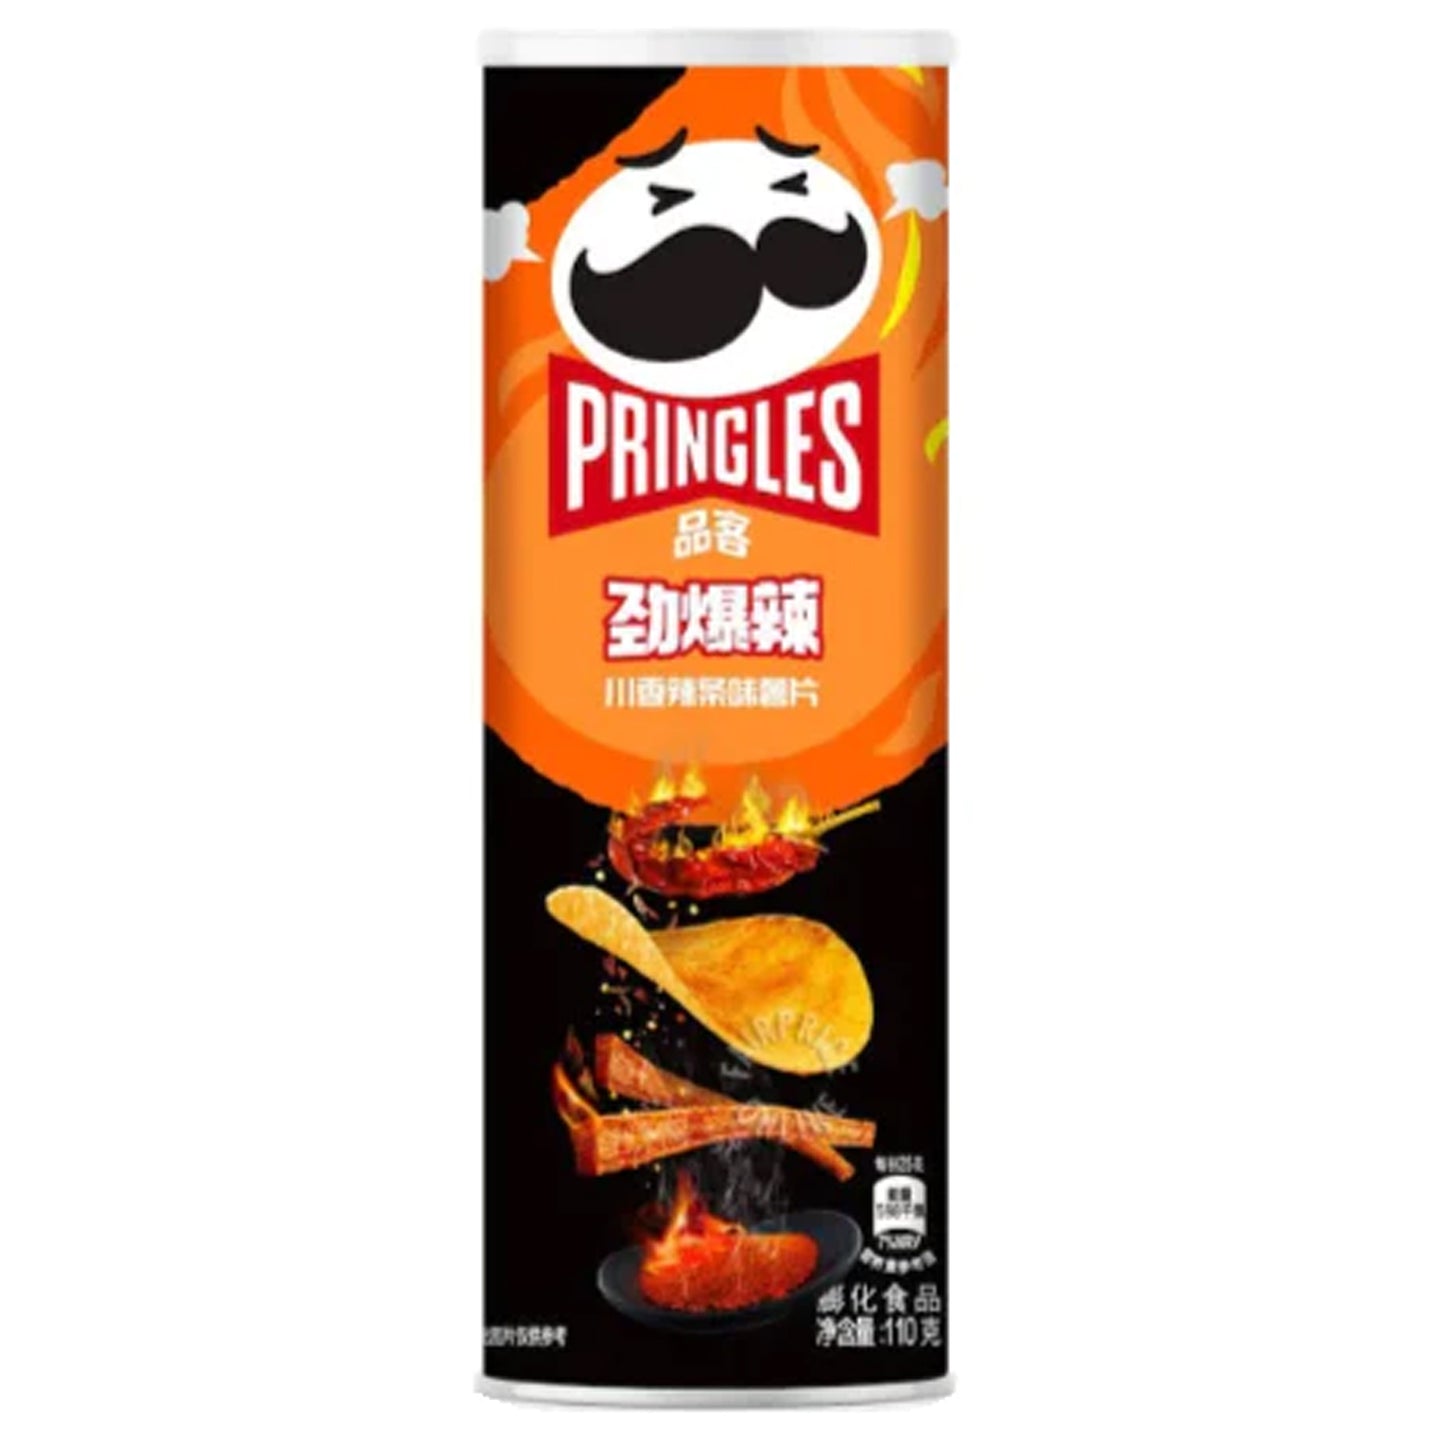 Pringles Chuanxiang Spicy Noodles | 20 x 110g